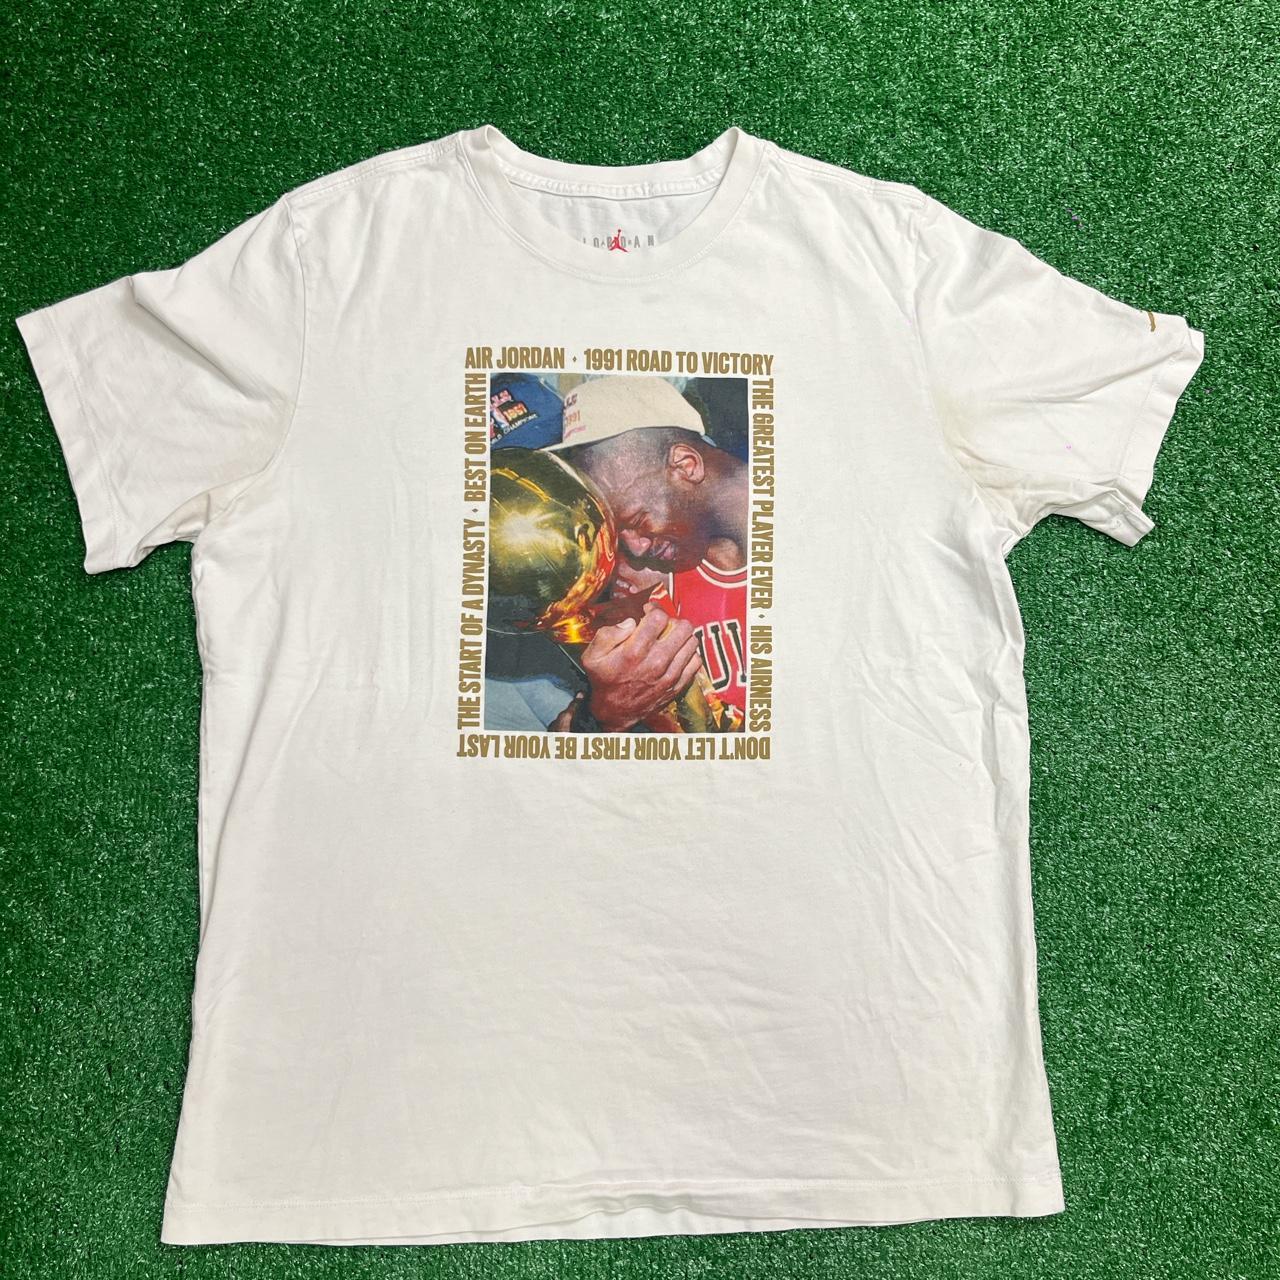 item listed by thegaragergv